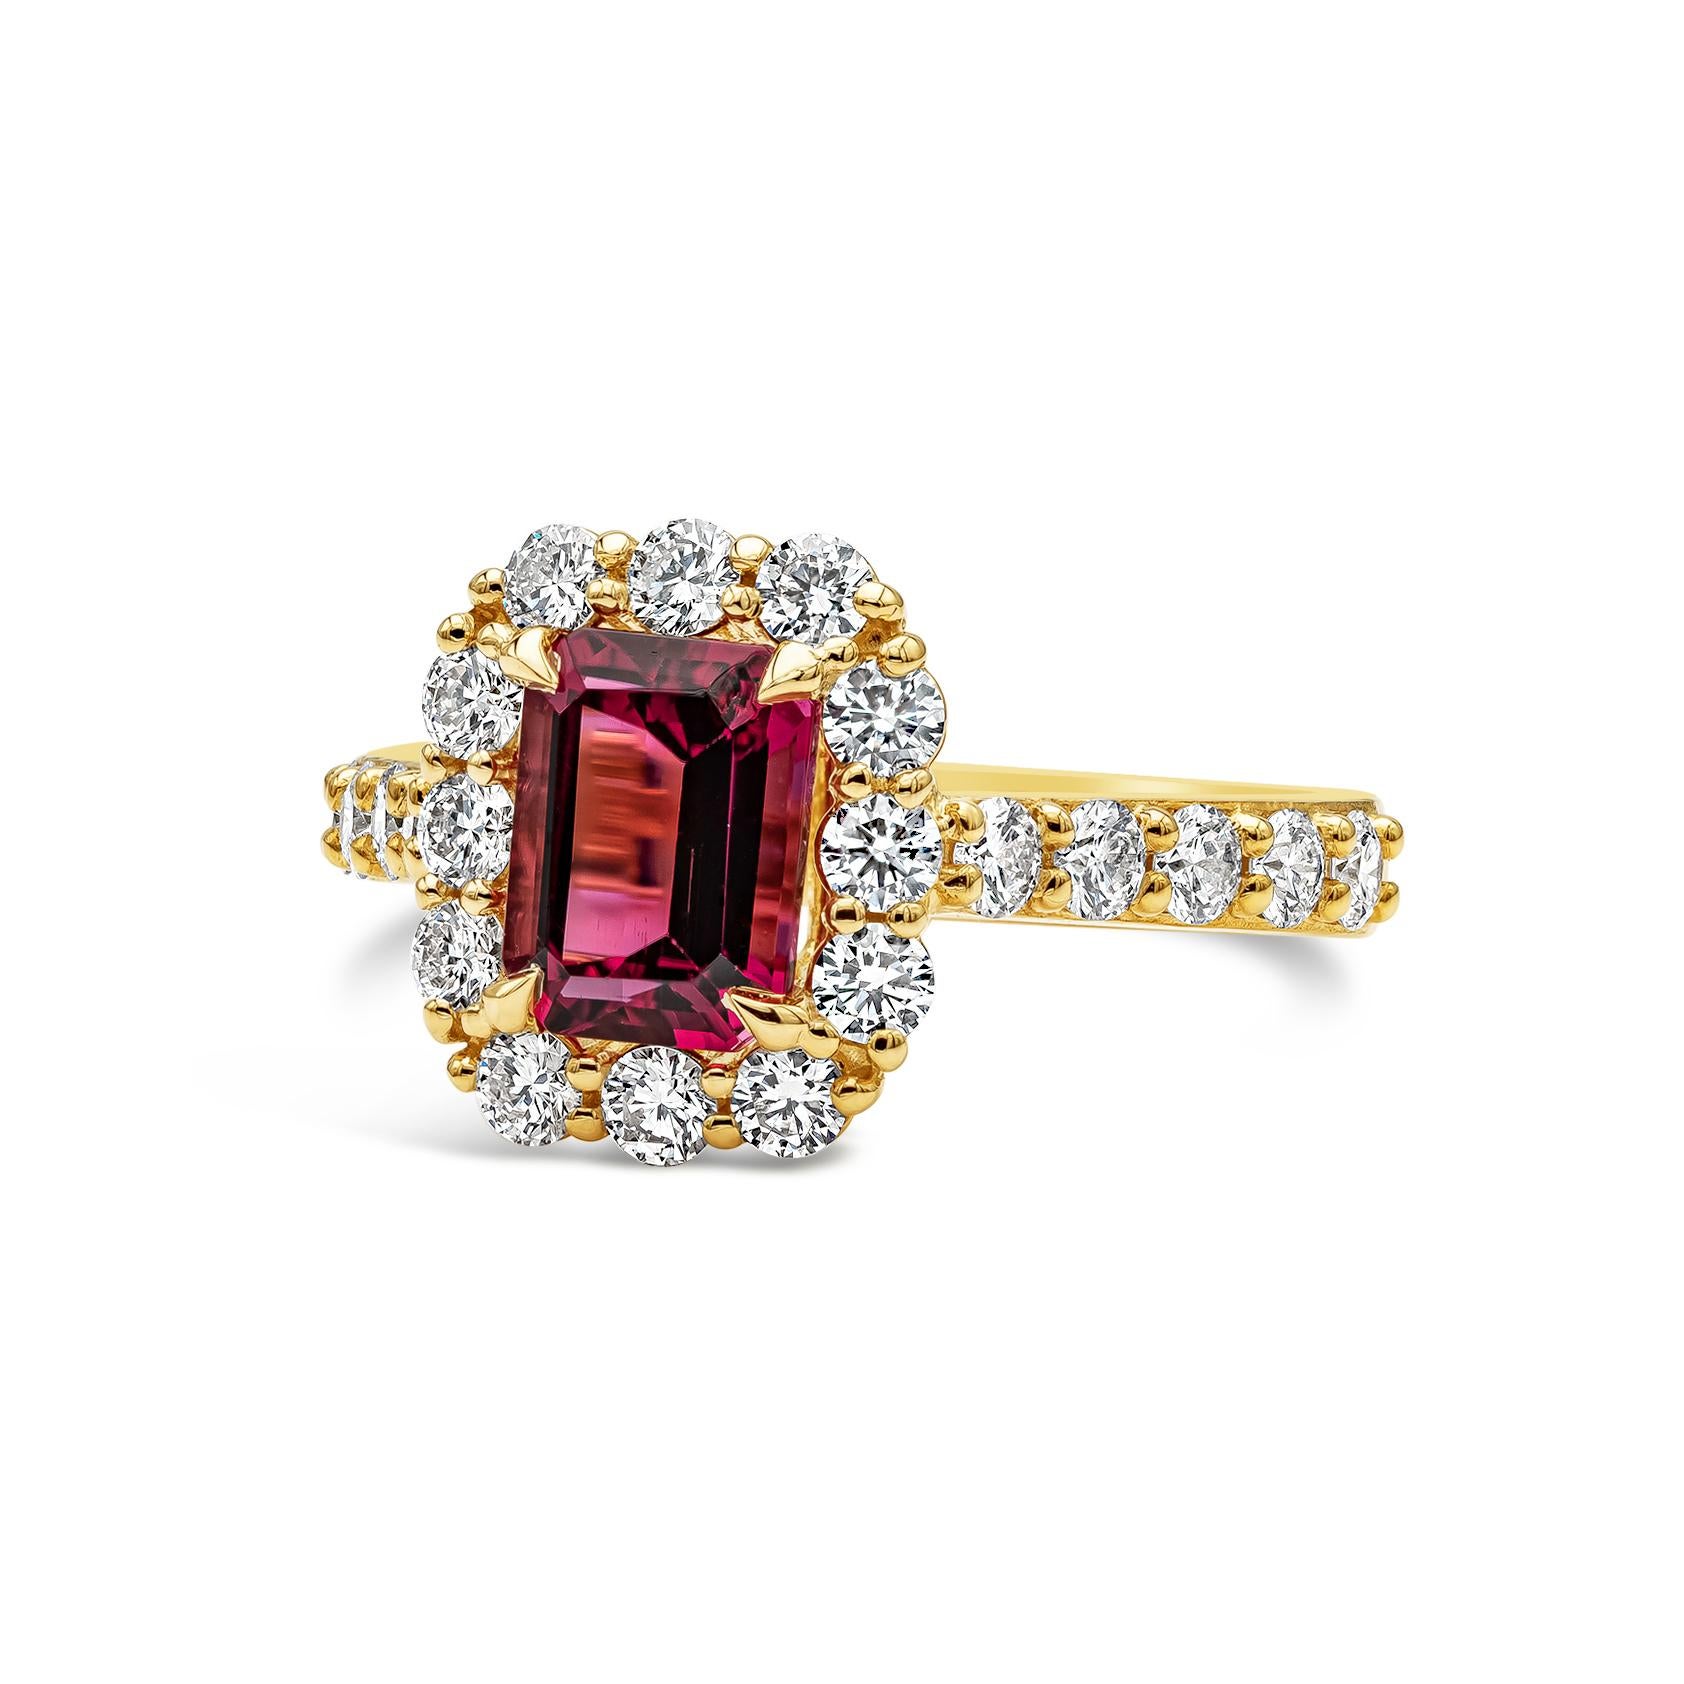 A timeless engagement ring style showcasing a vibrant purplish-red emerald cut rubellite weighing 1.58 carats total, set in a classic four prong basket setting. Surrounded by a single row of round brilliant diamonds weighing 1.10 carats total. Set